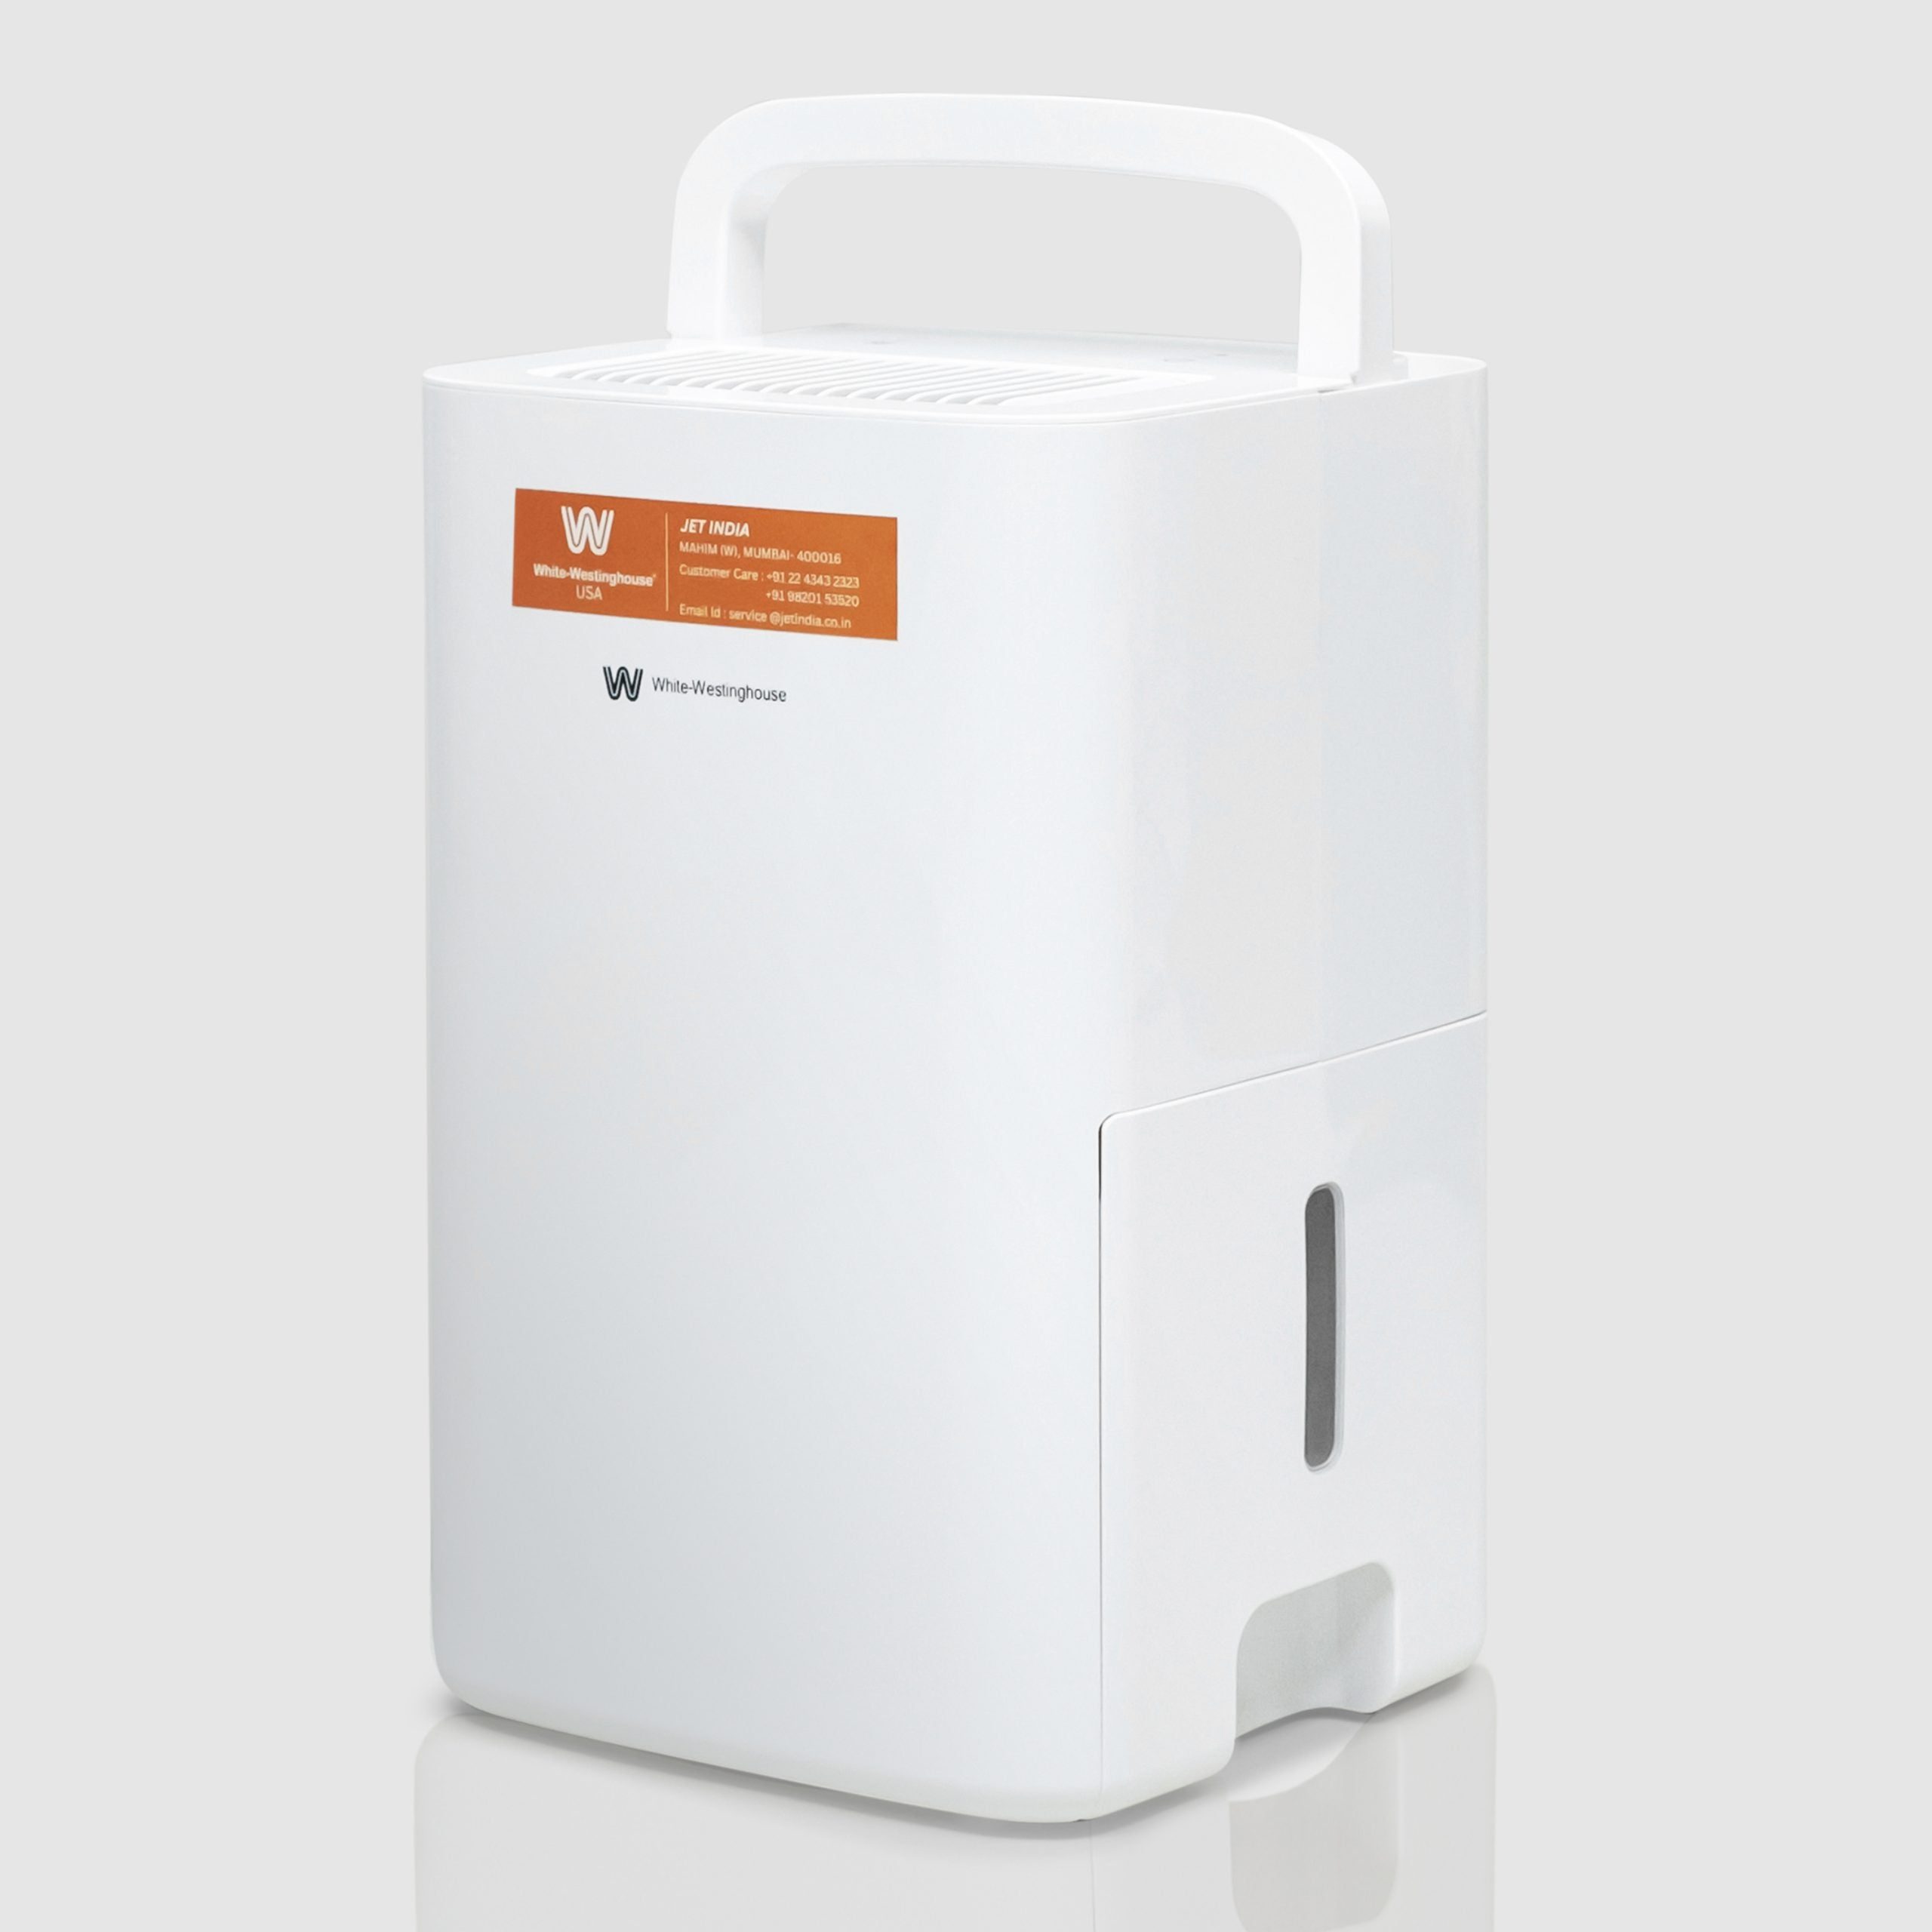 Angled view of the White Westinghouse Dehumidifier AWHD123L with the water tank in place, showcasing the built-in handle and sleek white design. The unit is ideal for maintaining optimal humidity levels in residential and commercial spaces.